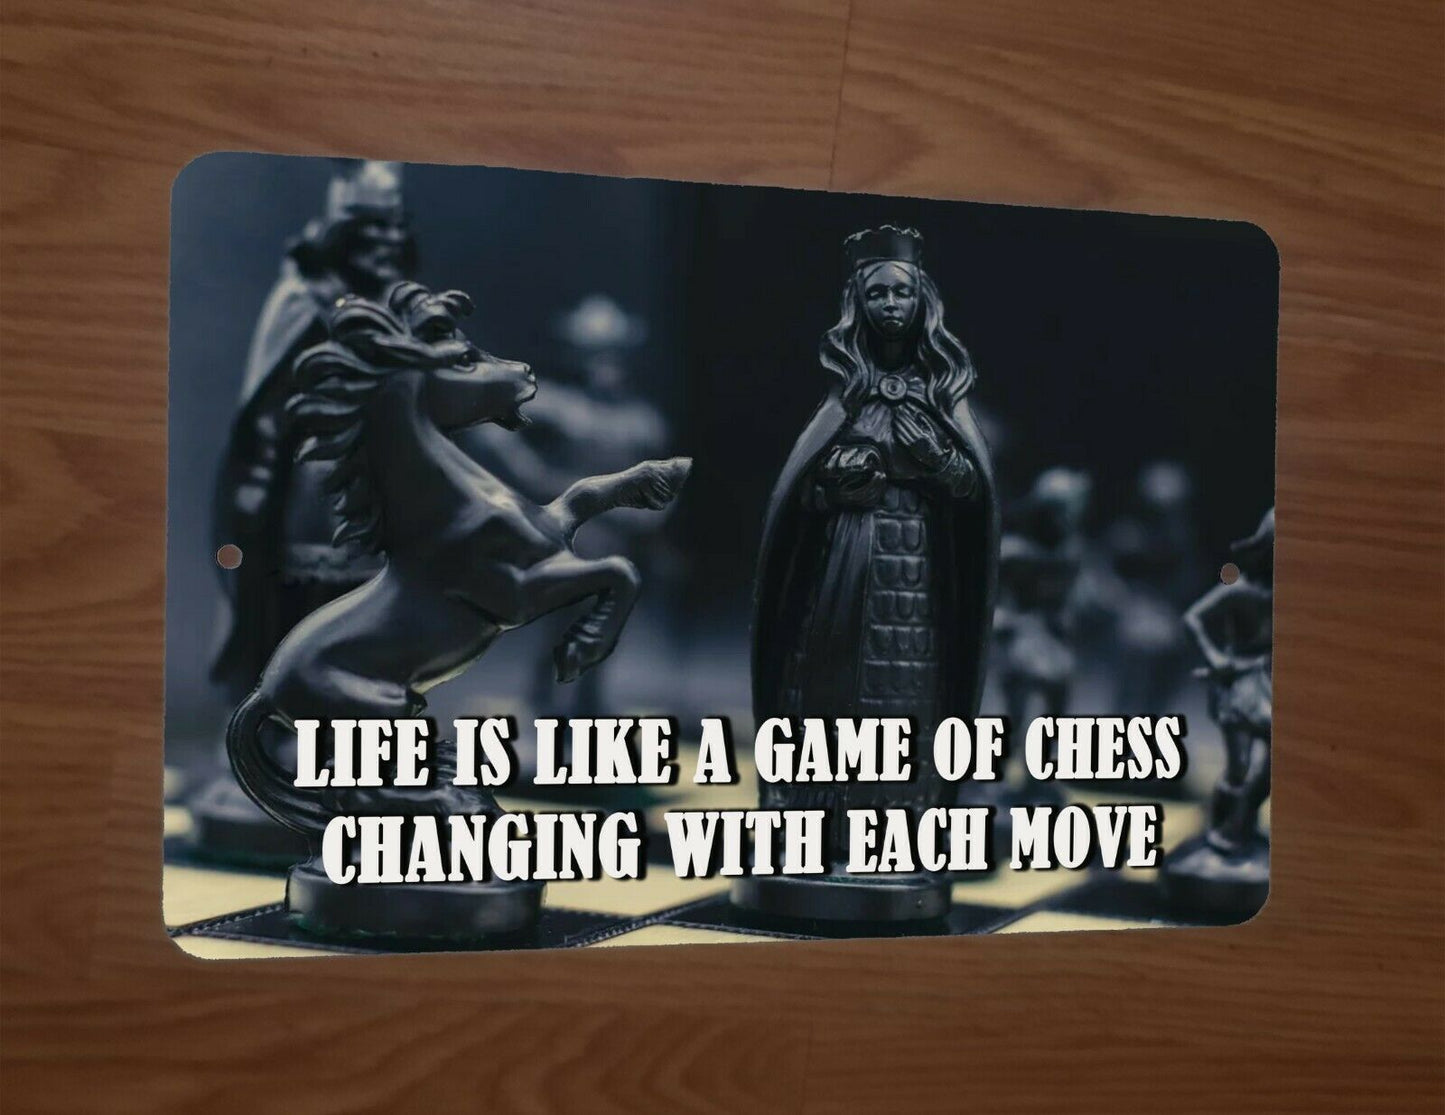 Life is like a Game of Chess Changing with each Move 8x12 Metal Wall Sign Phrase